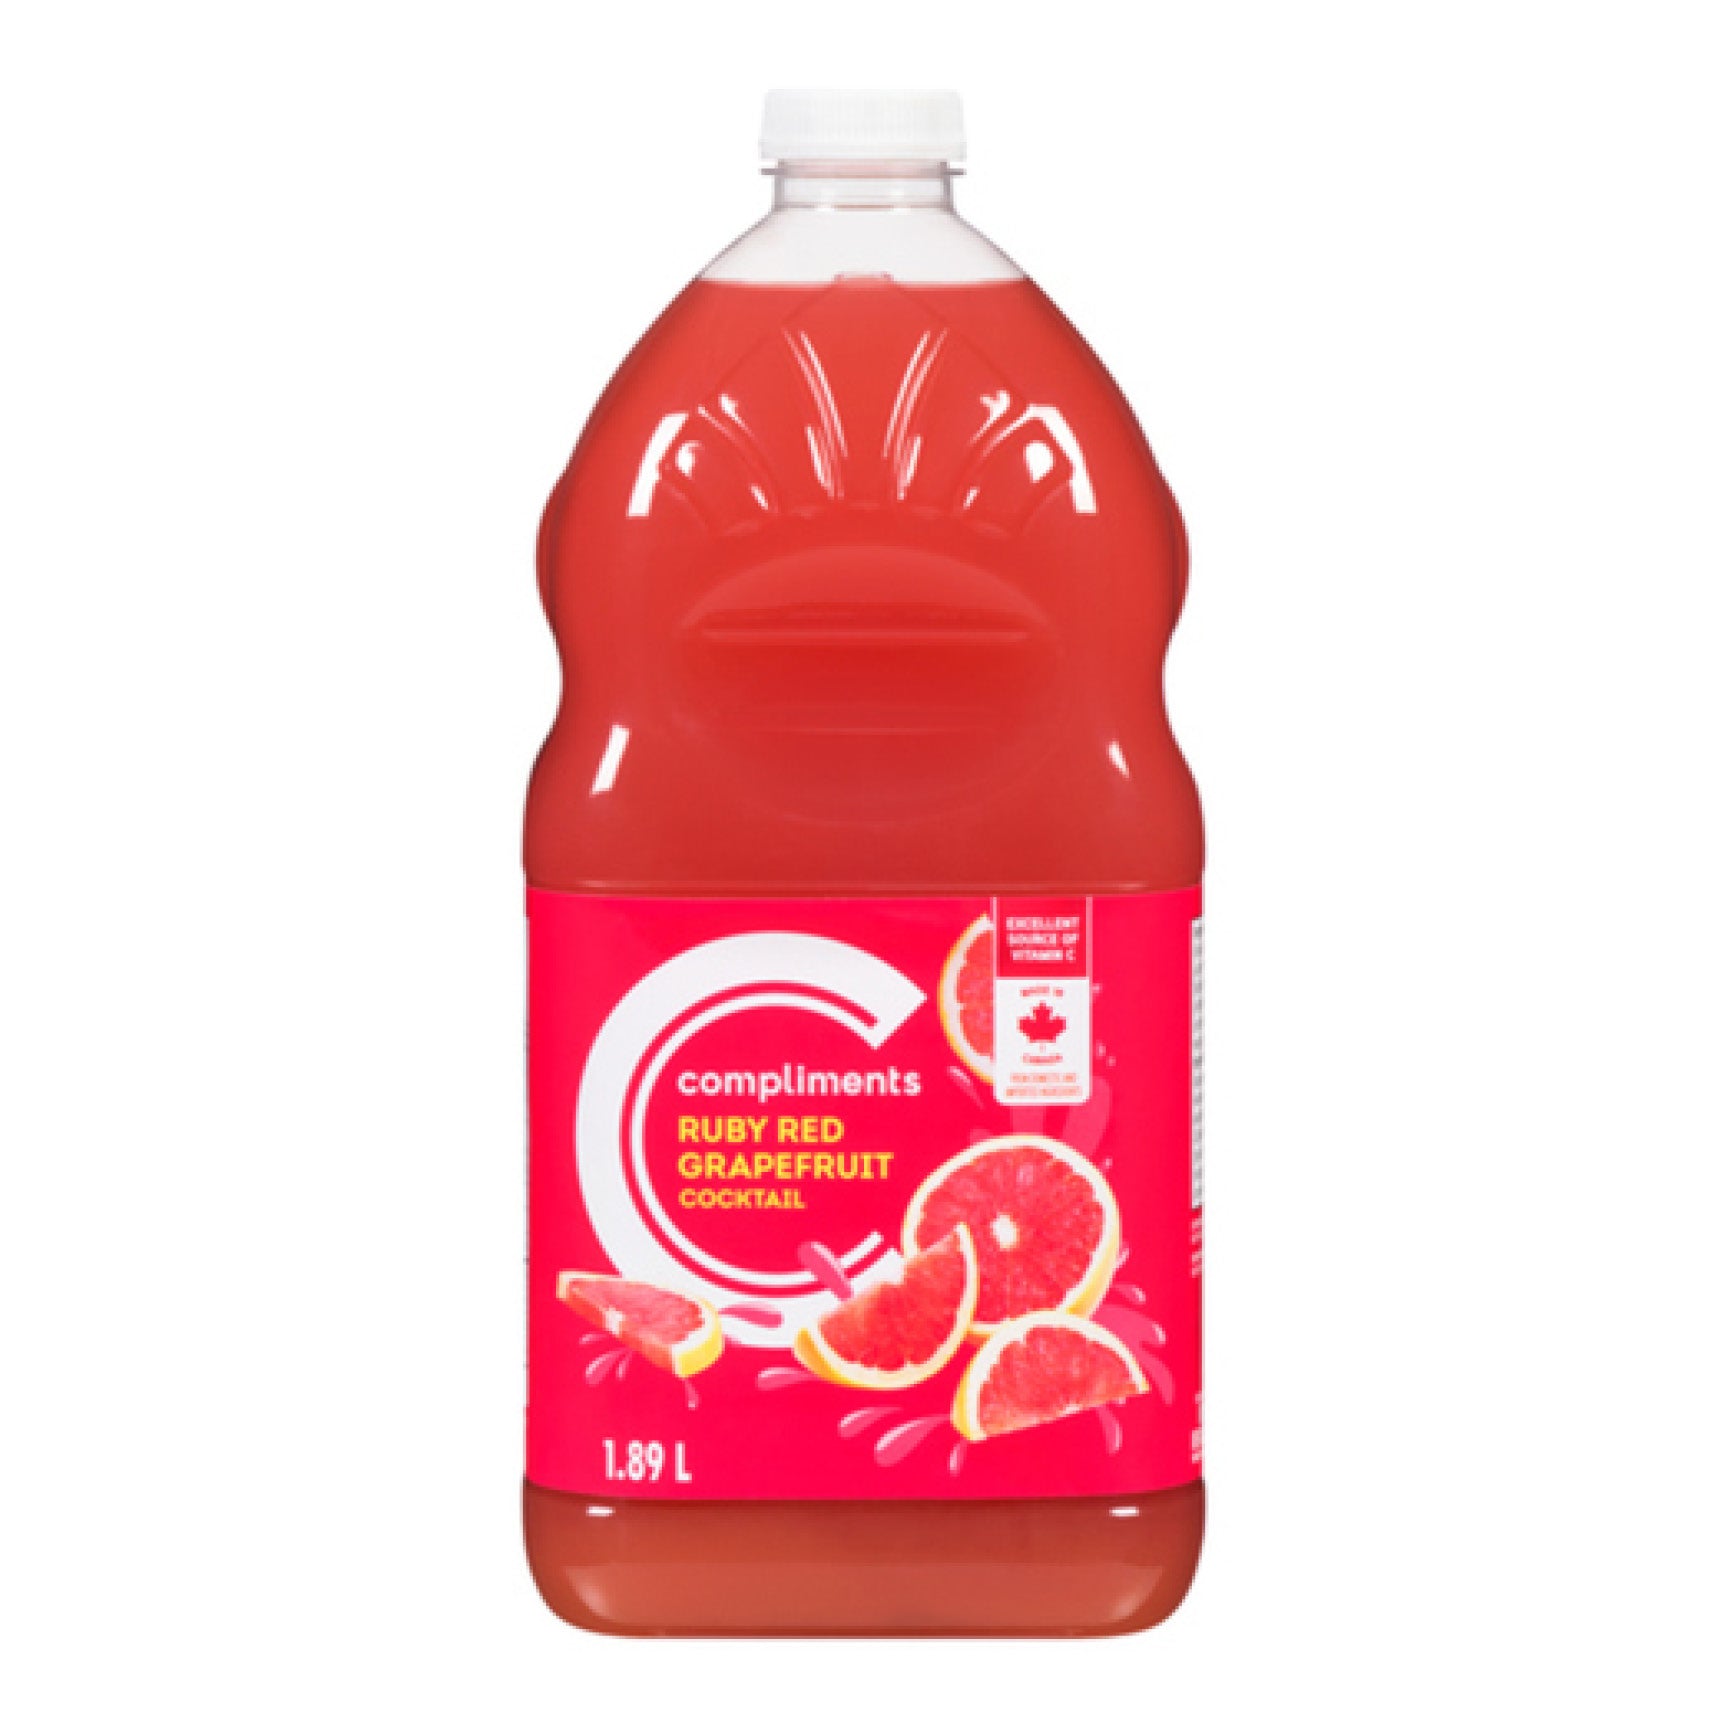 Compliments Cocktail Ruby Red Grapefruit Juice, 1.89L